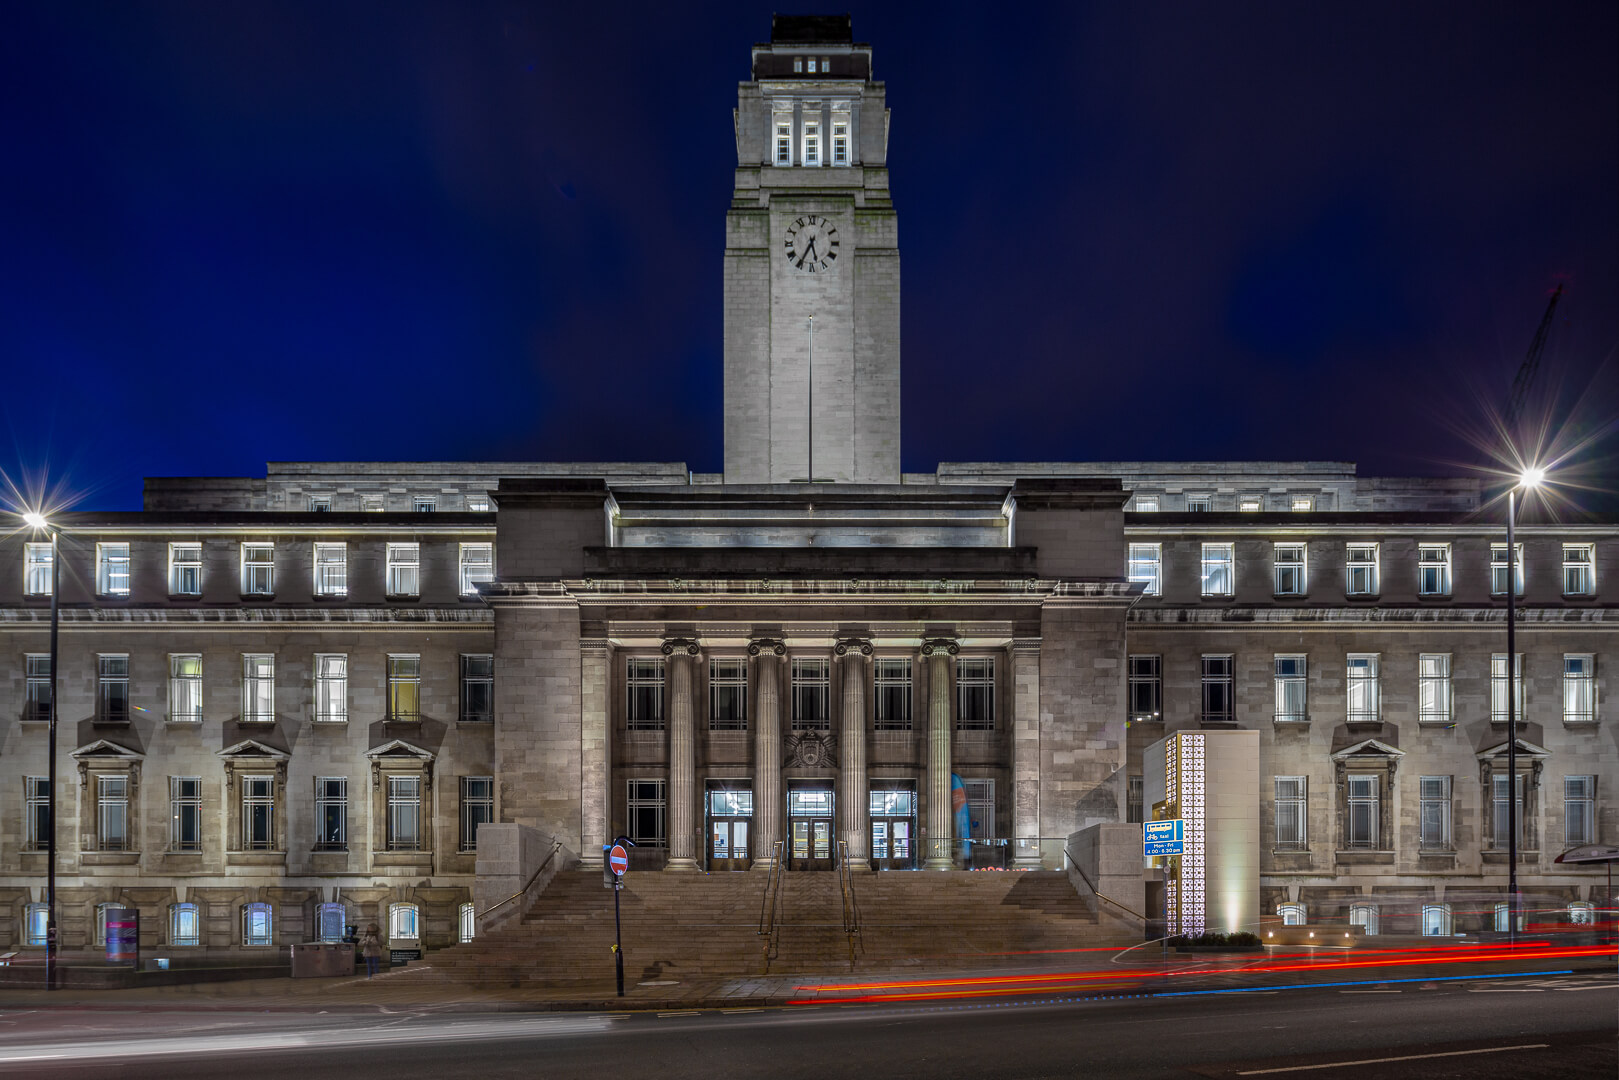 Commercial architecture and interior photography - Twilight image of the Parkinson Building, University of Leeds